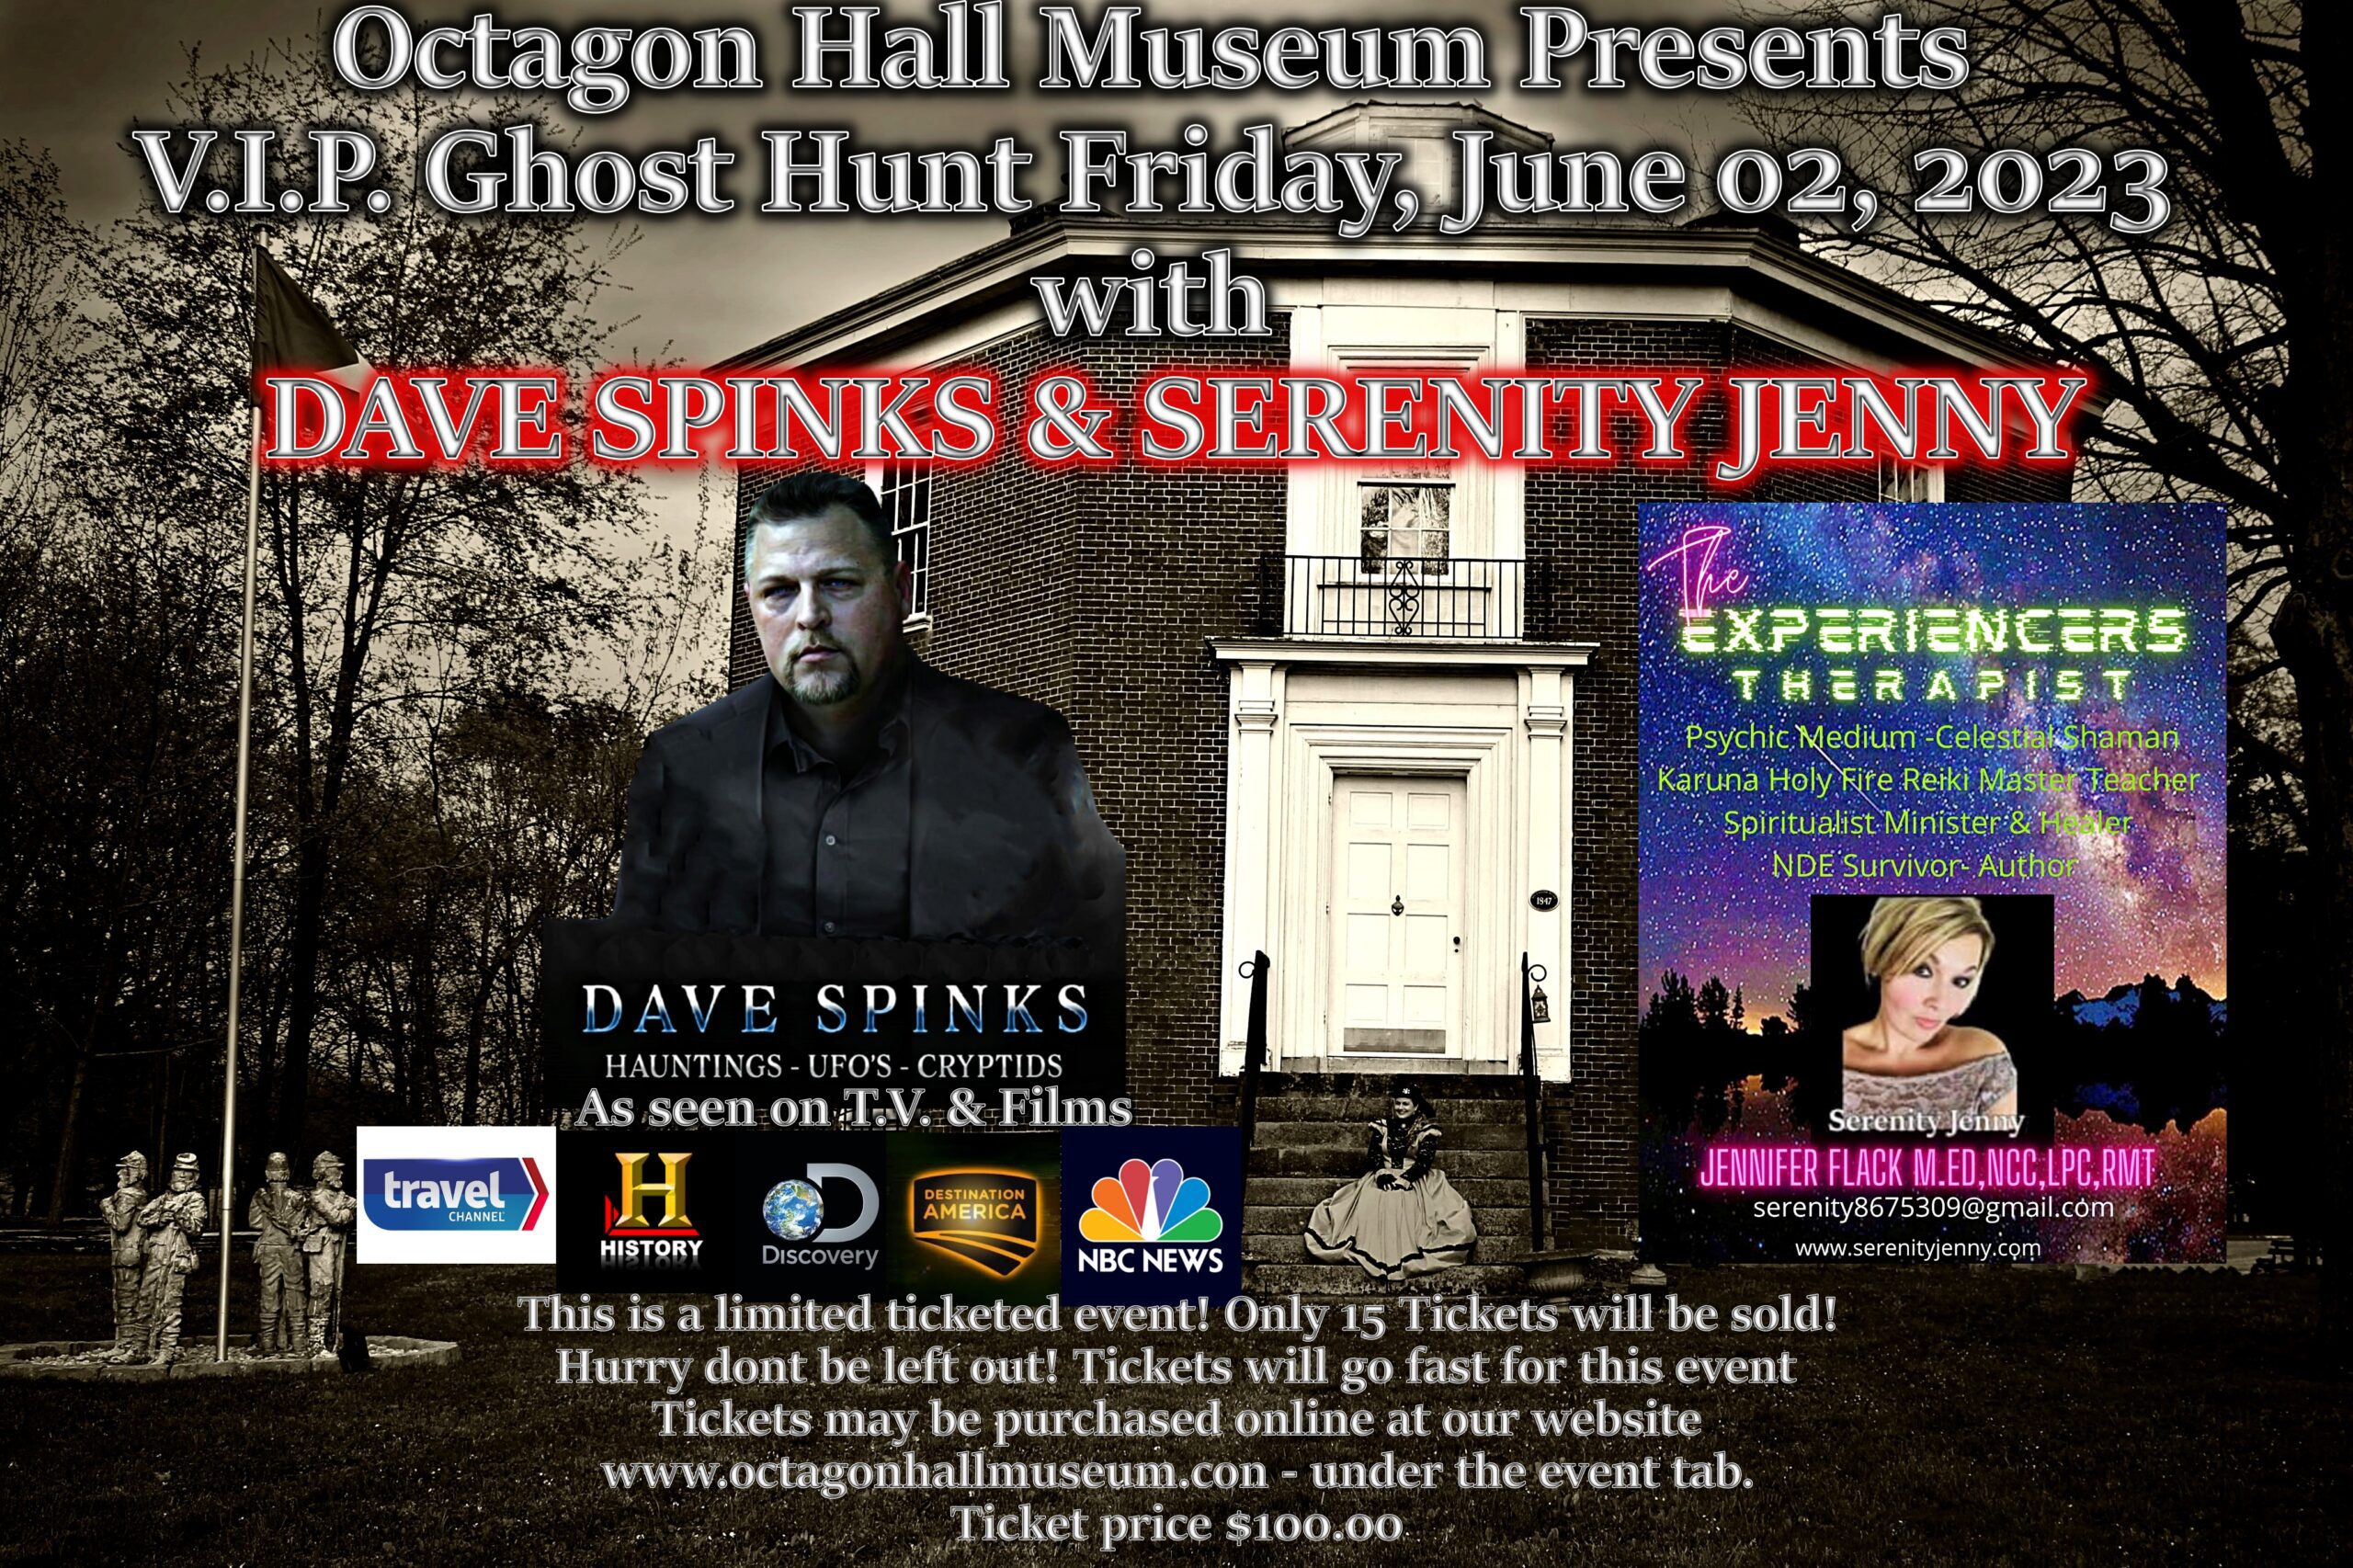 VIP ghost hunt Friday event